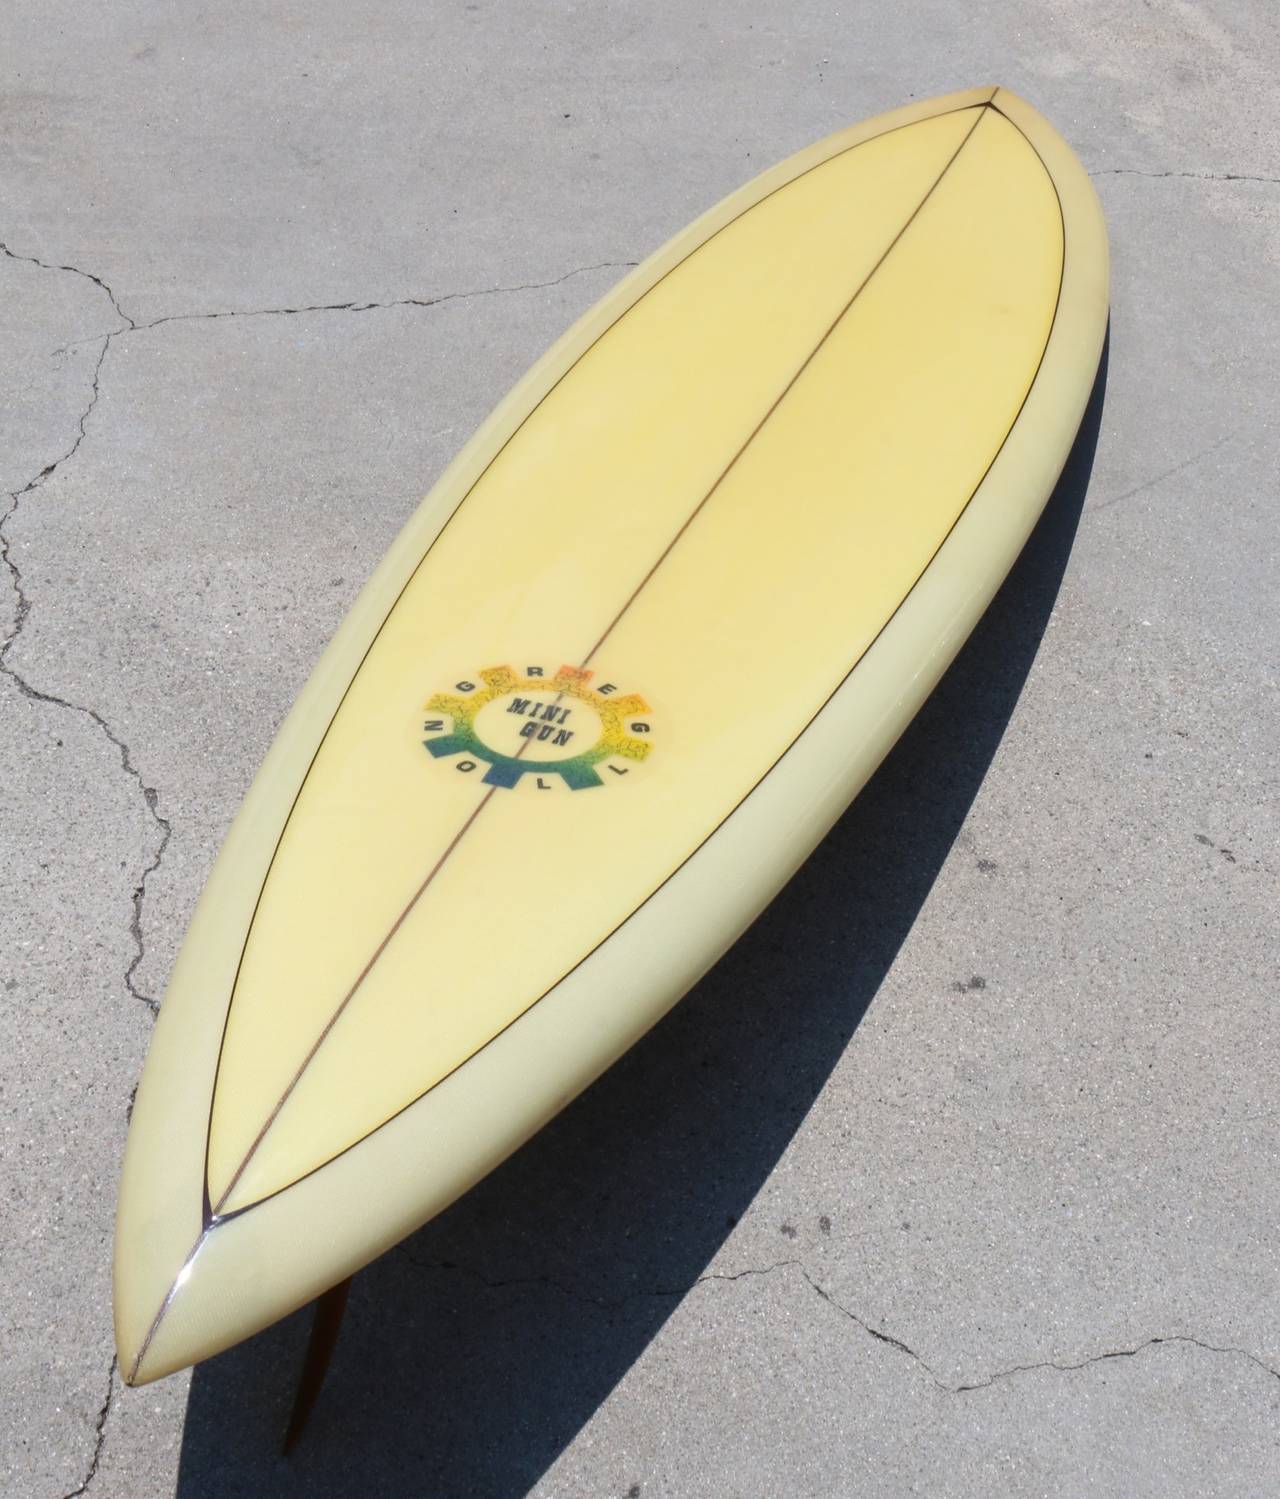 At first glance the untrained eye might just see a plain colored surfboard - but we want to tell you that this Sprocket Logo Mini Gun by Greg Noll is an outstanding icon of the shortboard revolution. It's all original, unrestored and bears the